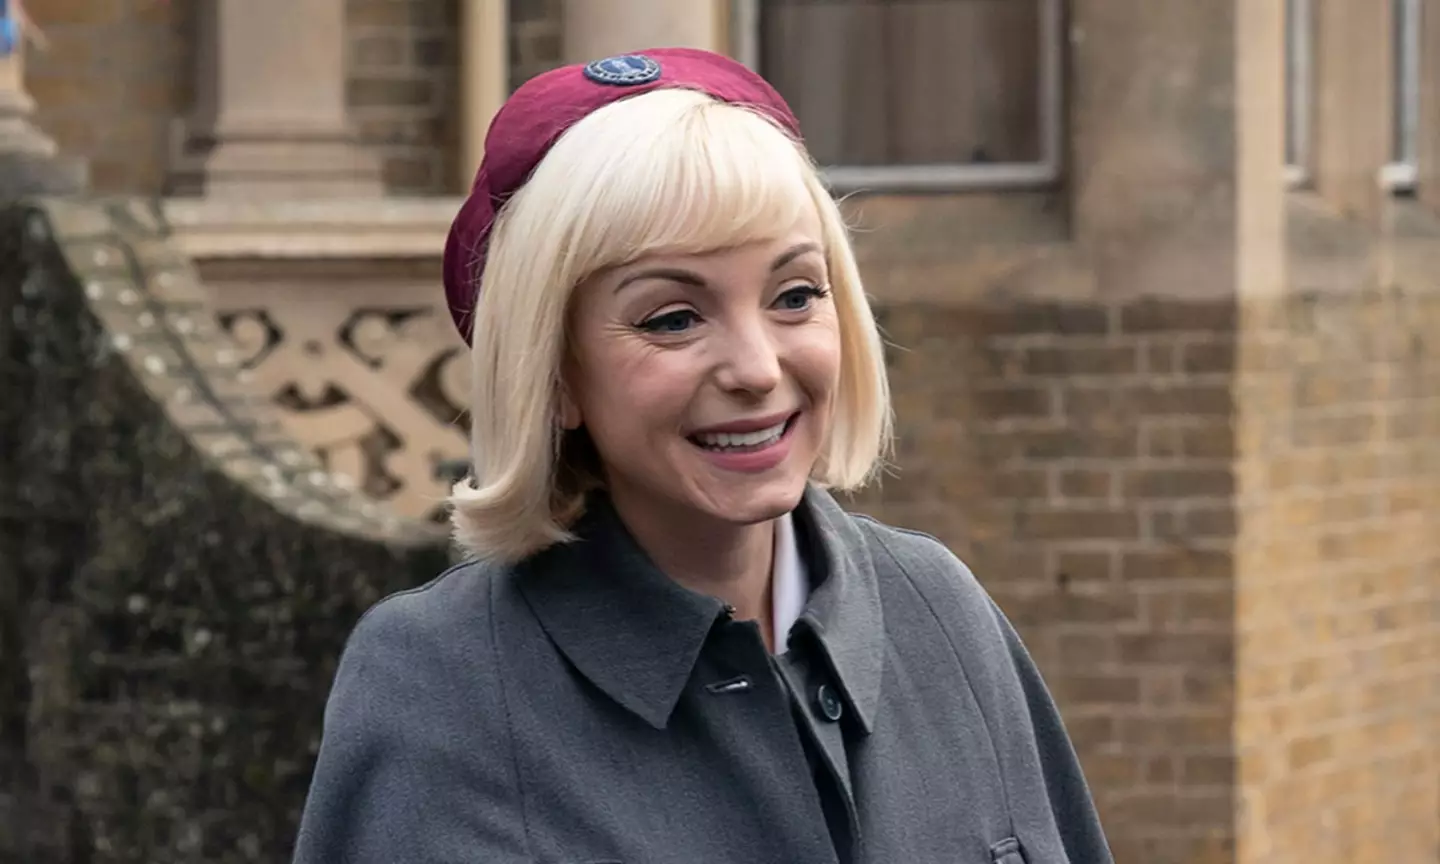 Trixie, played by Helen George, is a fave among fans.